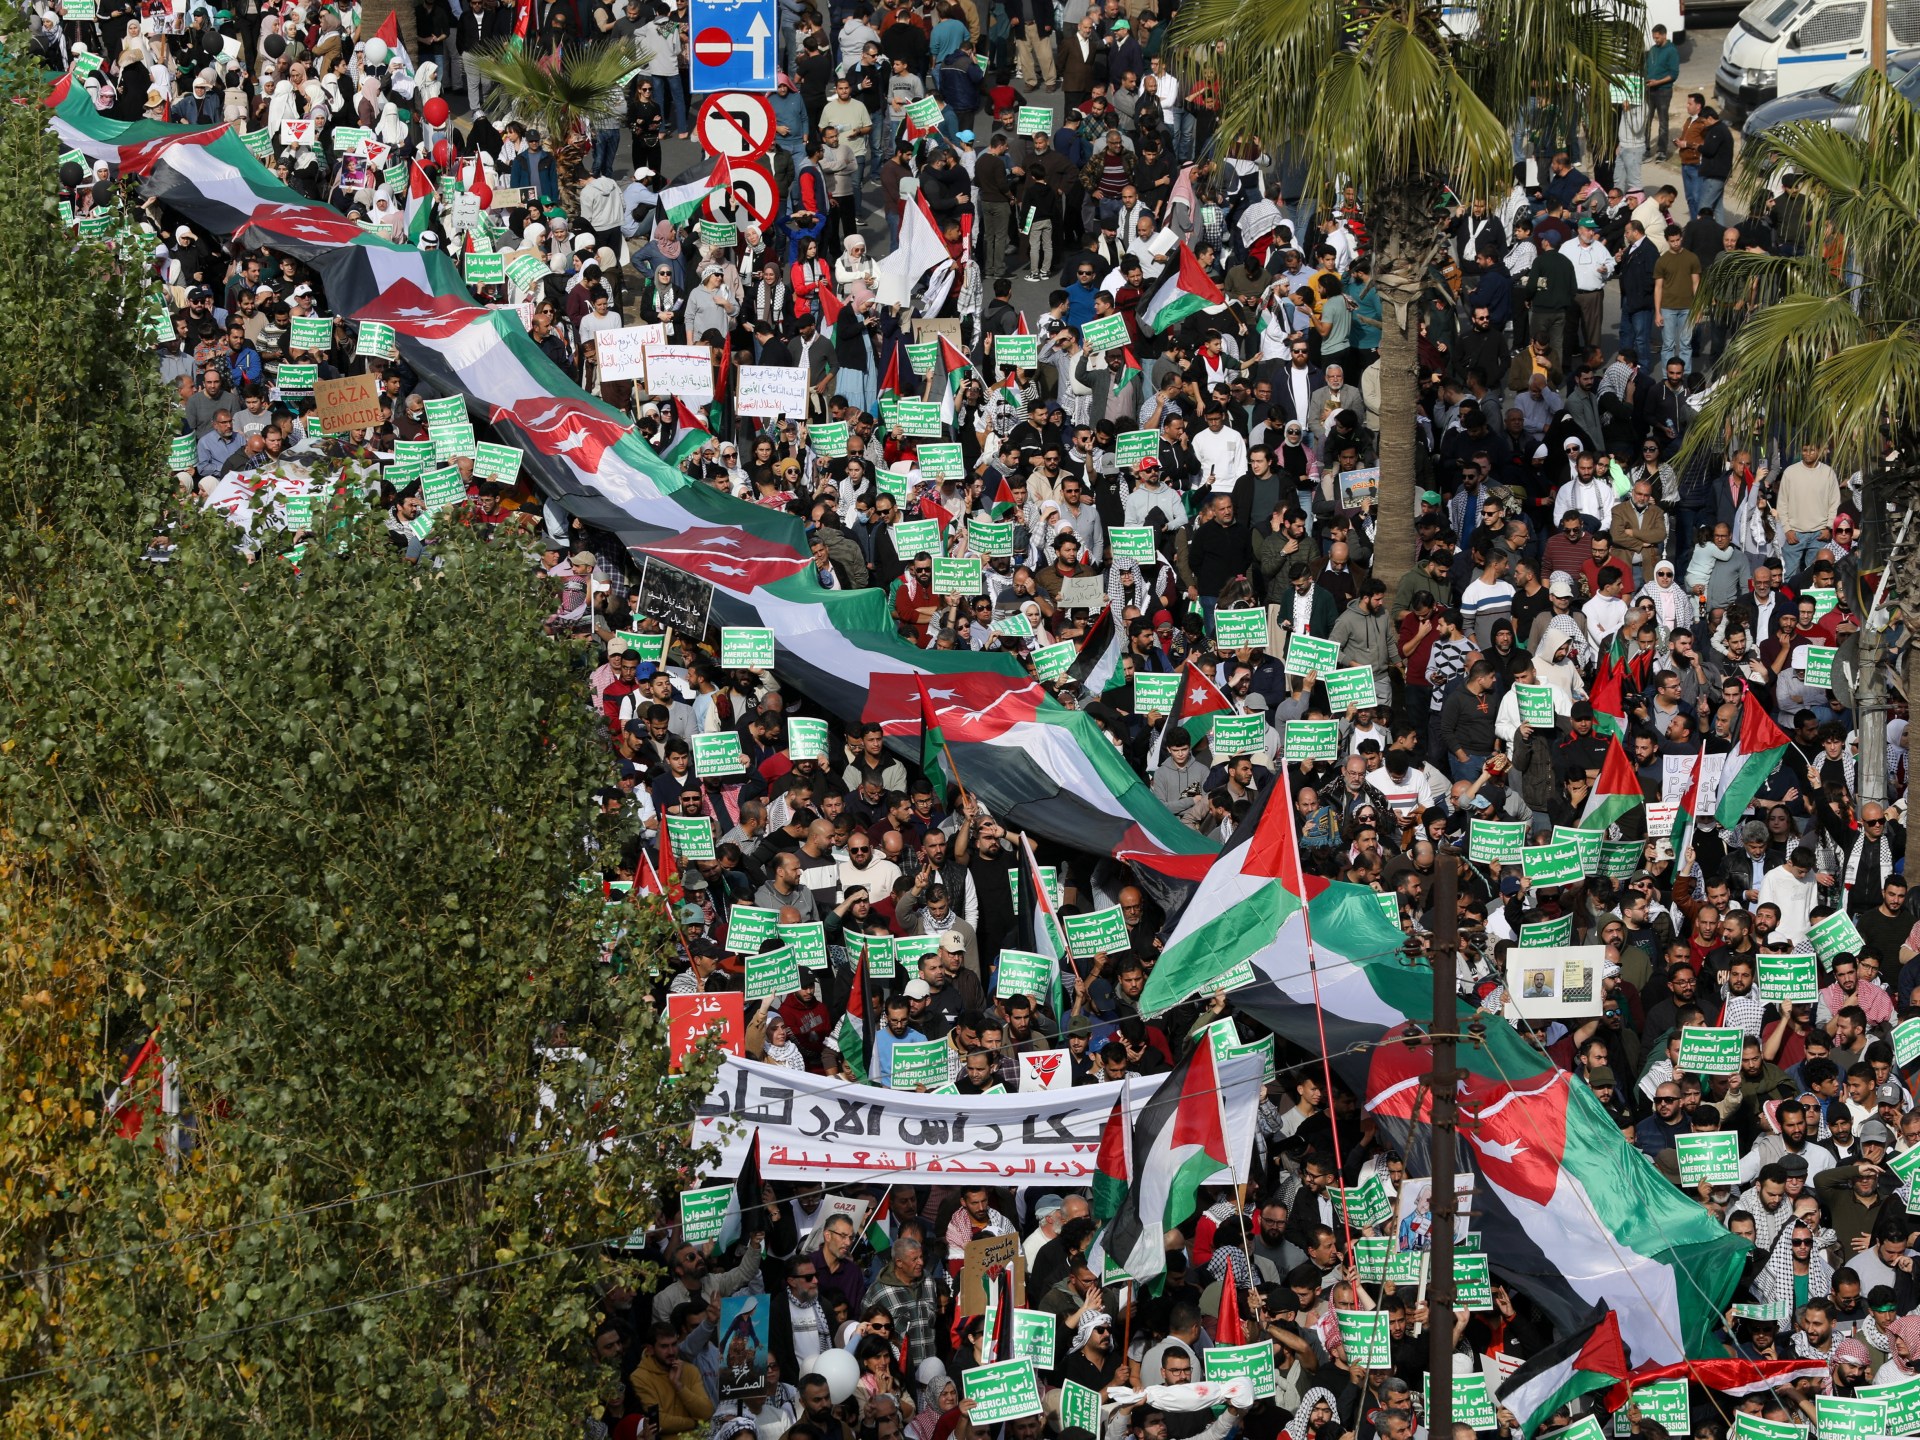 Protesters in Arab countries rally in solidarity with Palestinians in Gaza | Israel-Palestine conflict #Protesters #Arab #countries #rally #solidarity #Palestinians #Gaza #IsraelPalestine #conflict